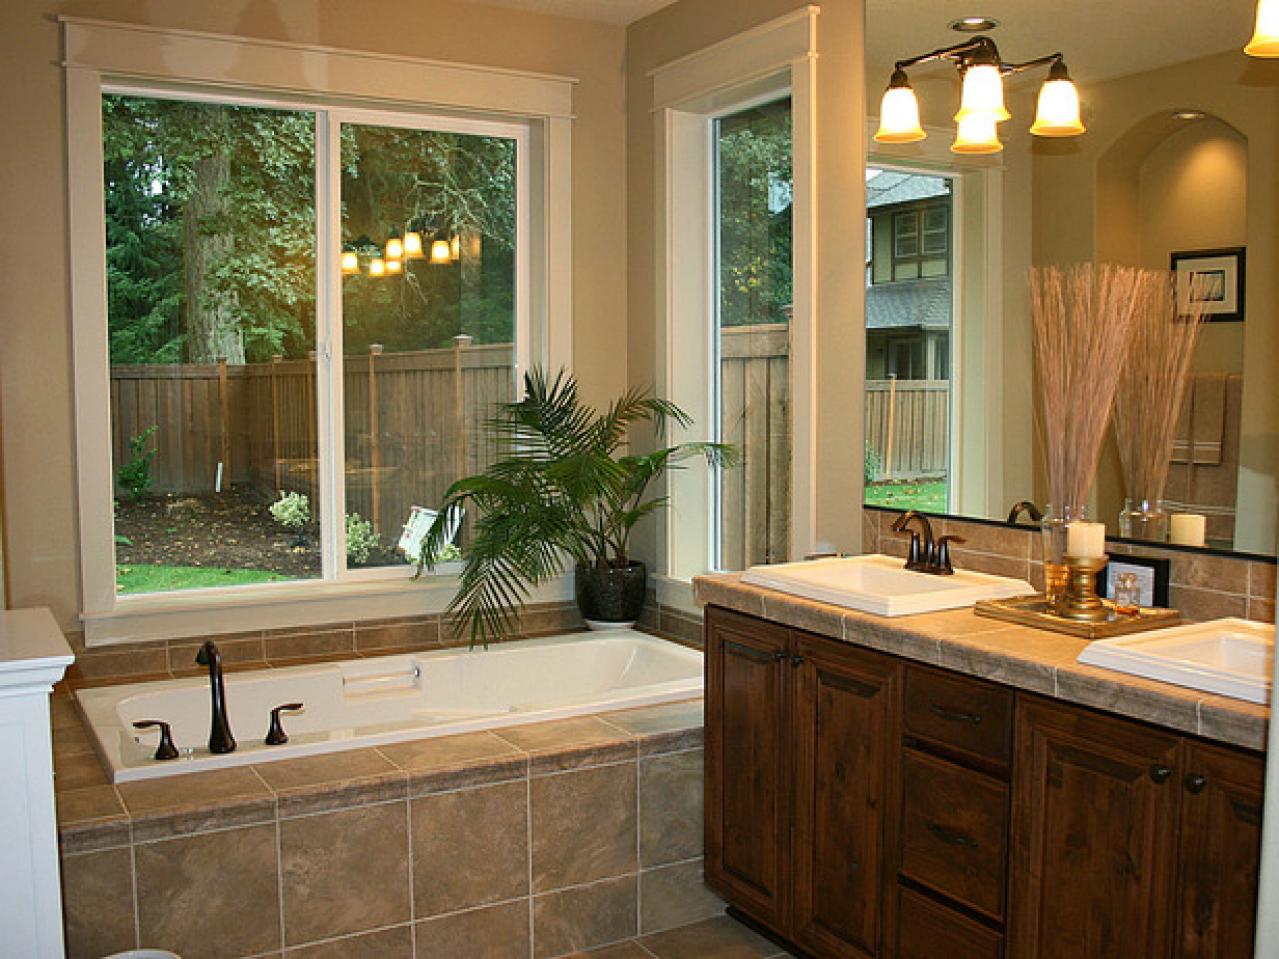 Hgtv Small Bathroom Makeovers Large And Beautiful Photos Photo To Select Hgtv Small Bathroom Makeovers Design Your Home